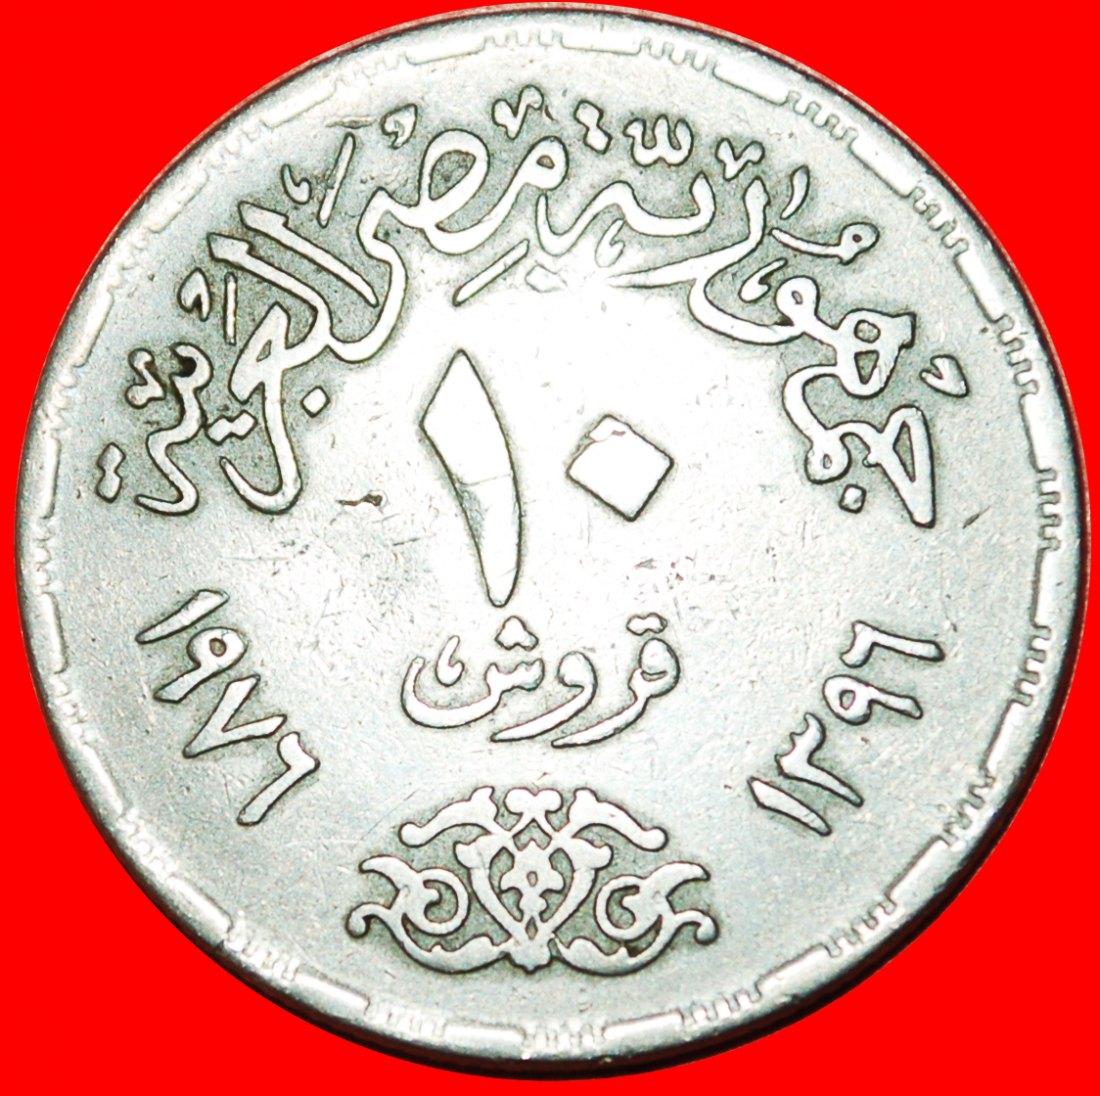  • NOT MULE 1972: EGYPT ★ 10 PIASTRES 1396 1976 SHIP 1975! LOW START ★ NO RESERVE!   